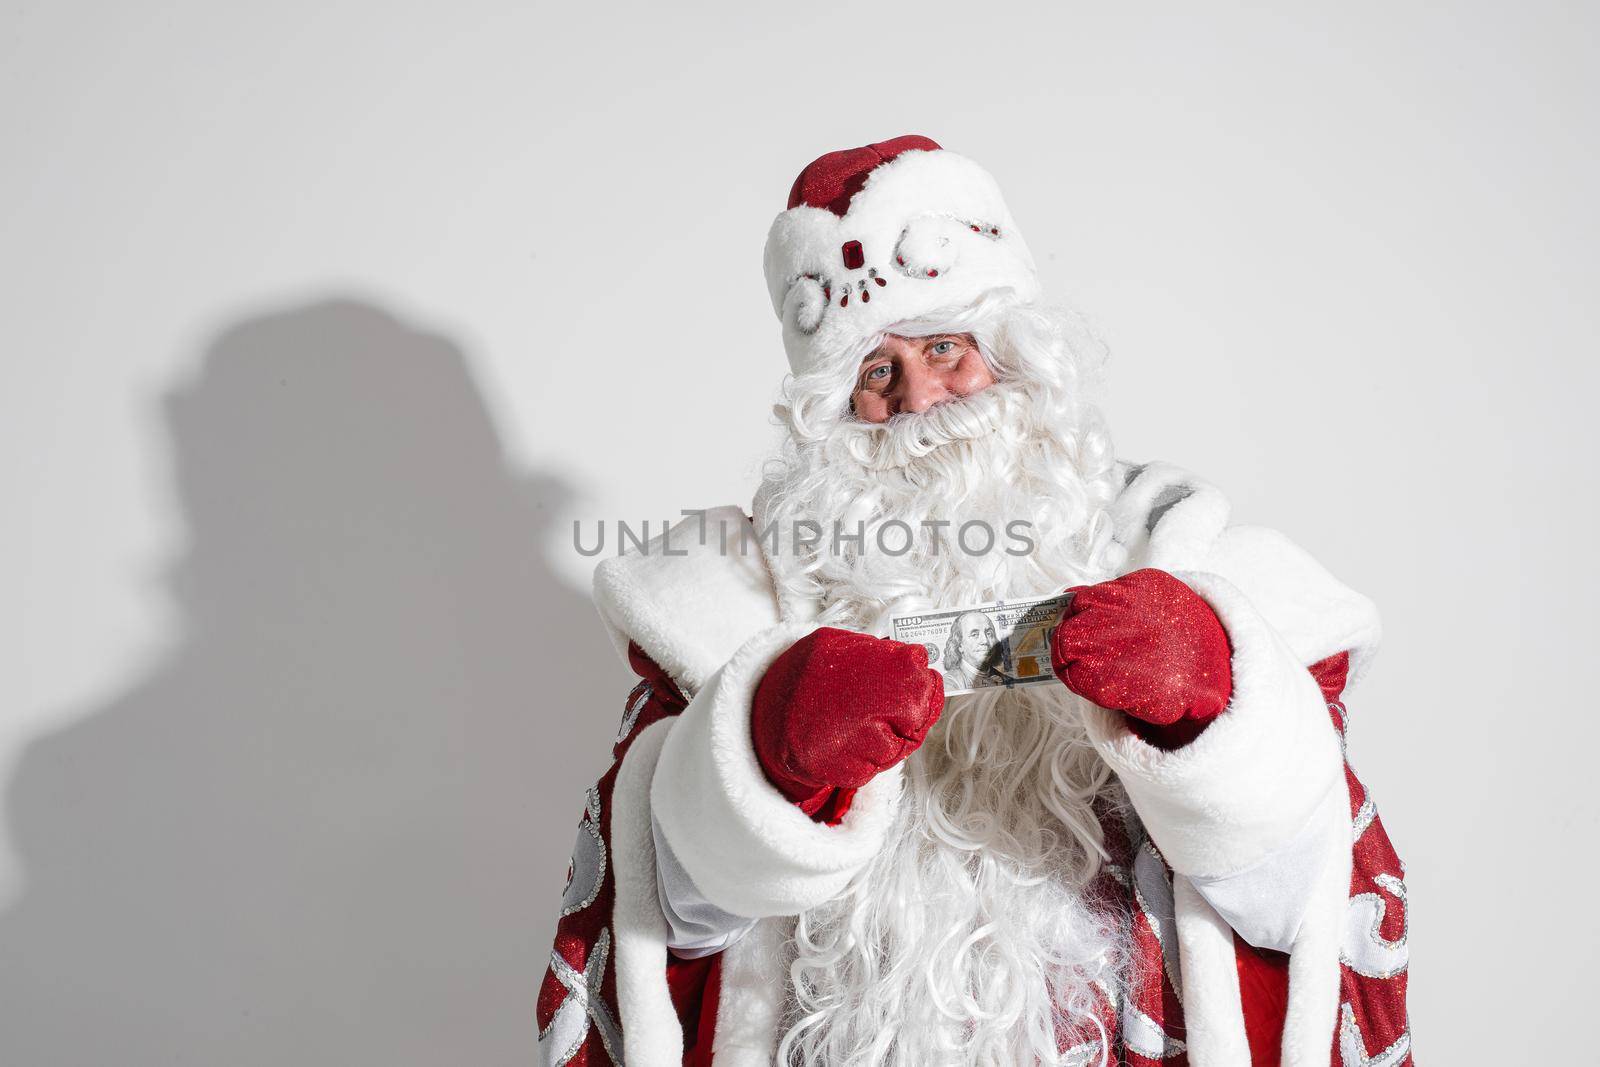 Smiling generous Santa Claus with long white beard in fancy costume holding banknote in hands wearing red mittens. Cutout on white background.